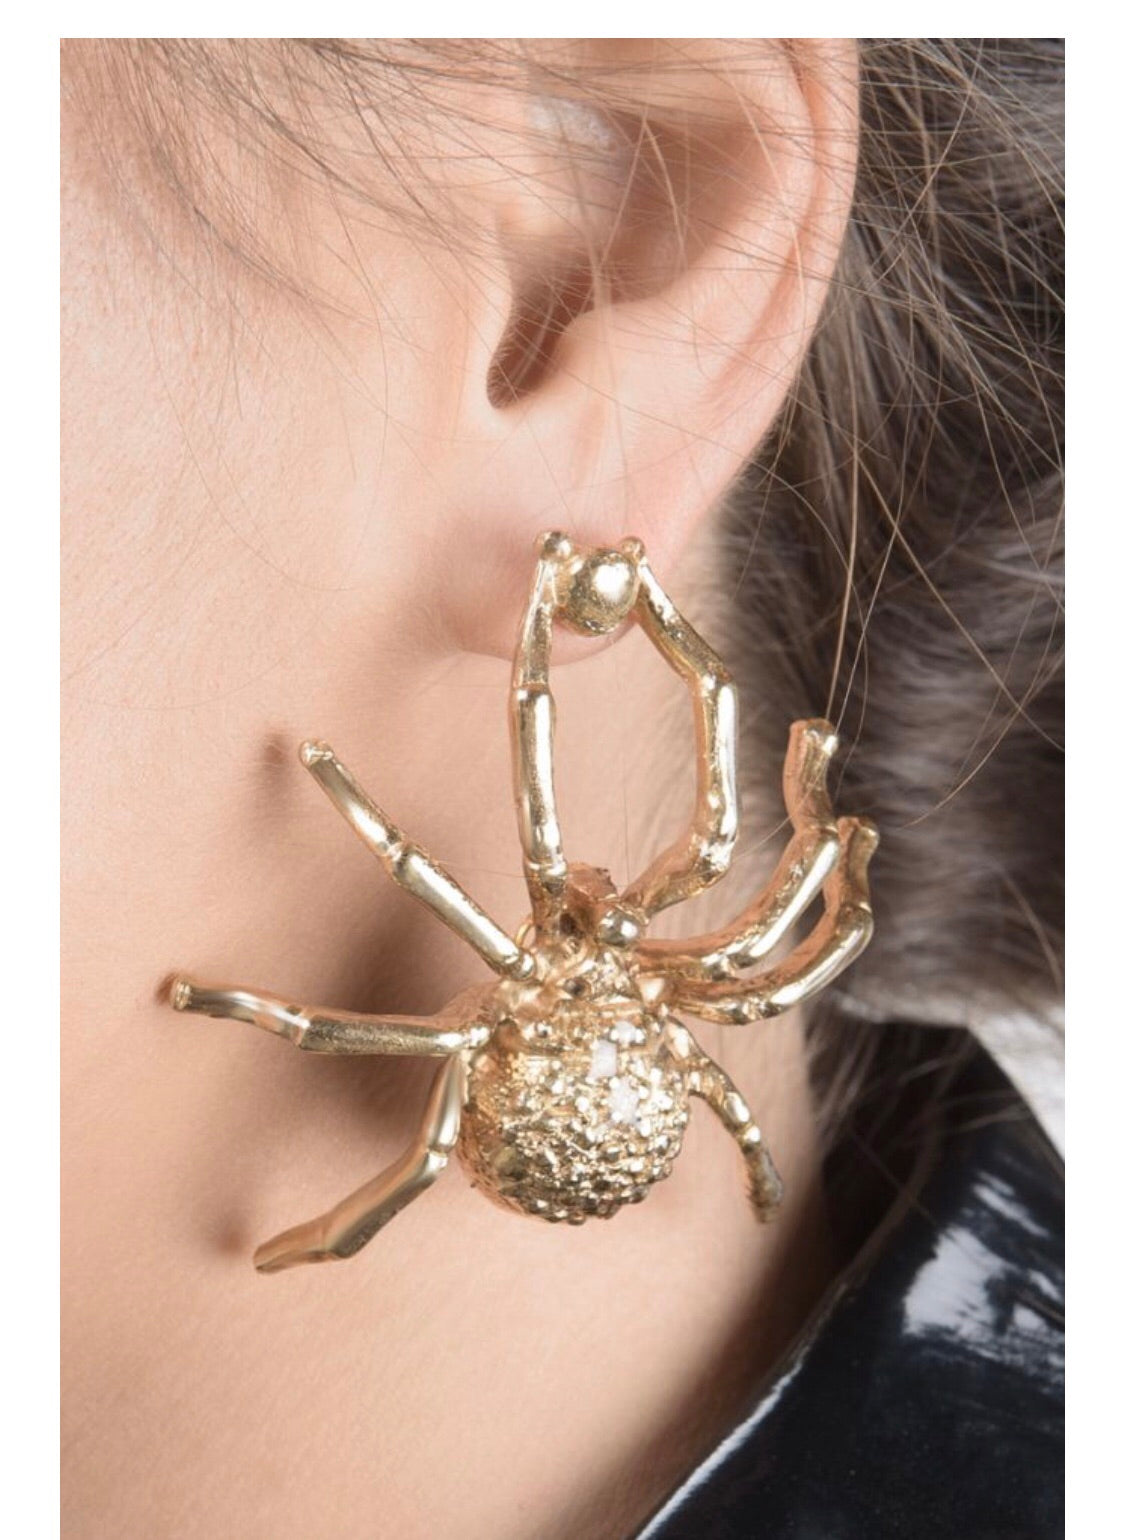 Not Itsy Bitsy Spider Earrings